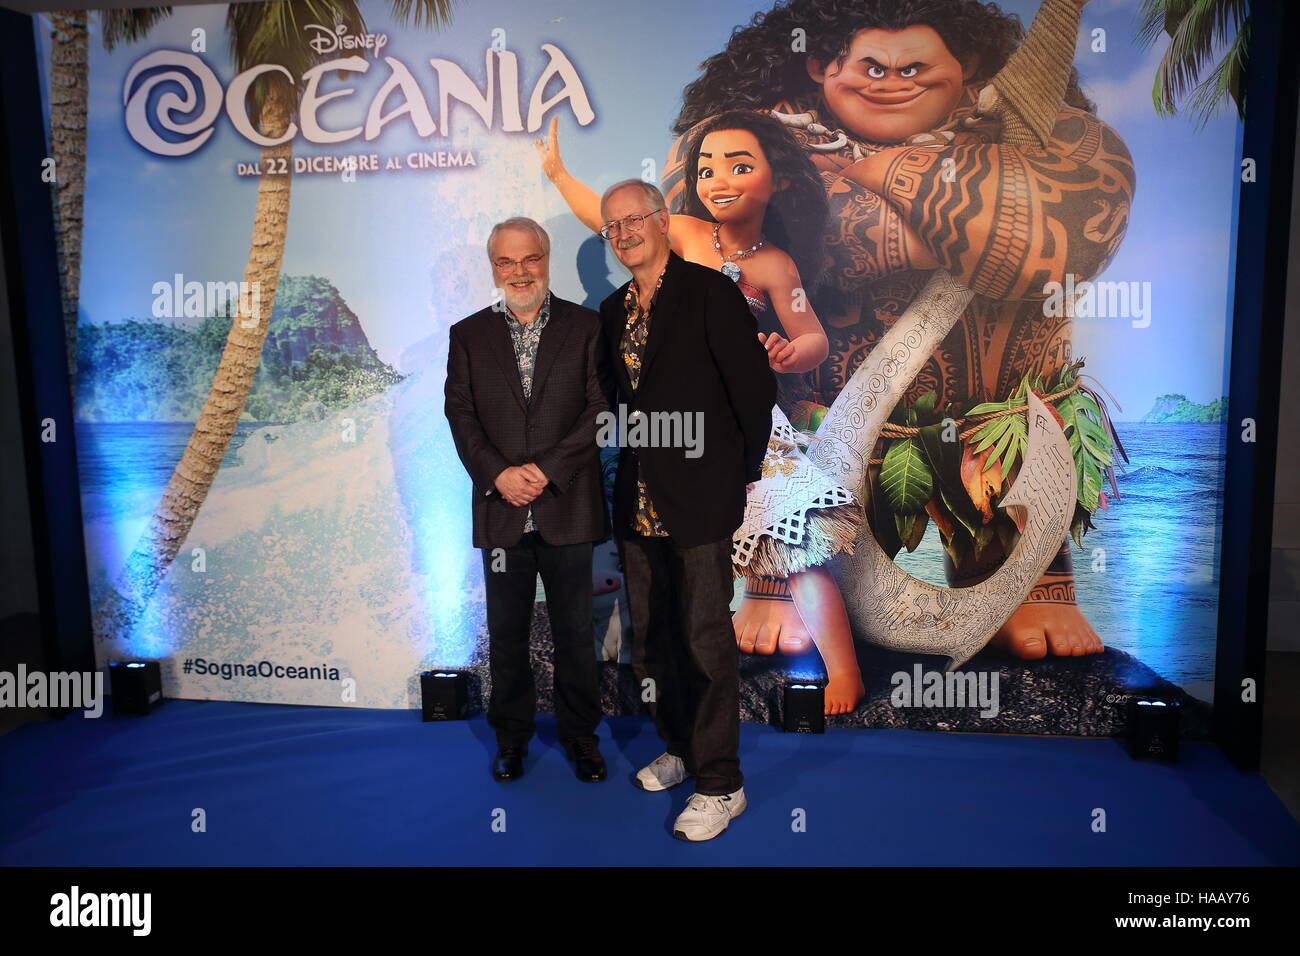 Rome, Italy. 28th Nov, 2016. Film Directors Ron Clements and John Muske during photocall of 'Oceania', new film produced by Walt Disney Animation Studios Credit:  Matteo Nardone/Pacific Press/Alamy Live News Stock Photo